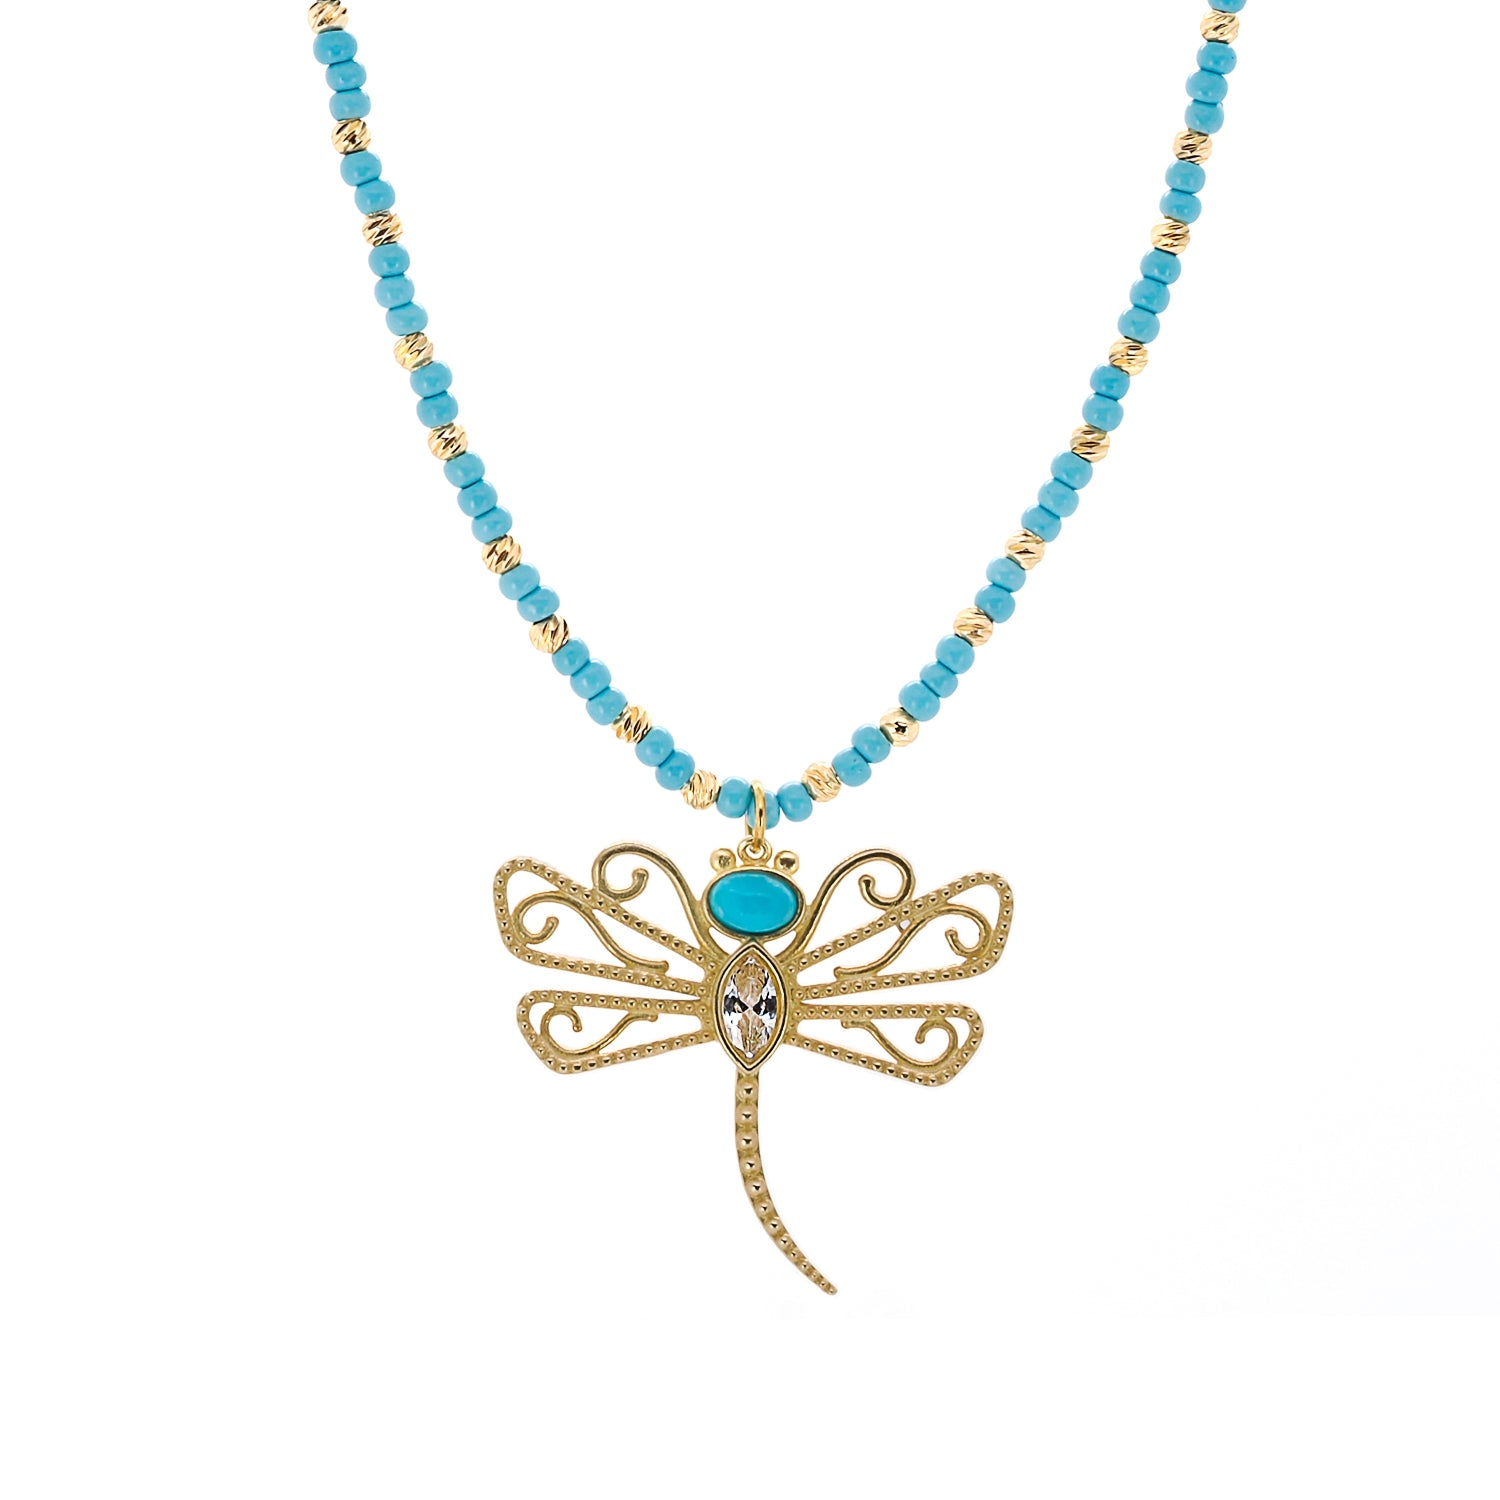 Turquoise Dragonfly Necklace - Symbolism and Elegance.